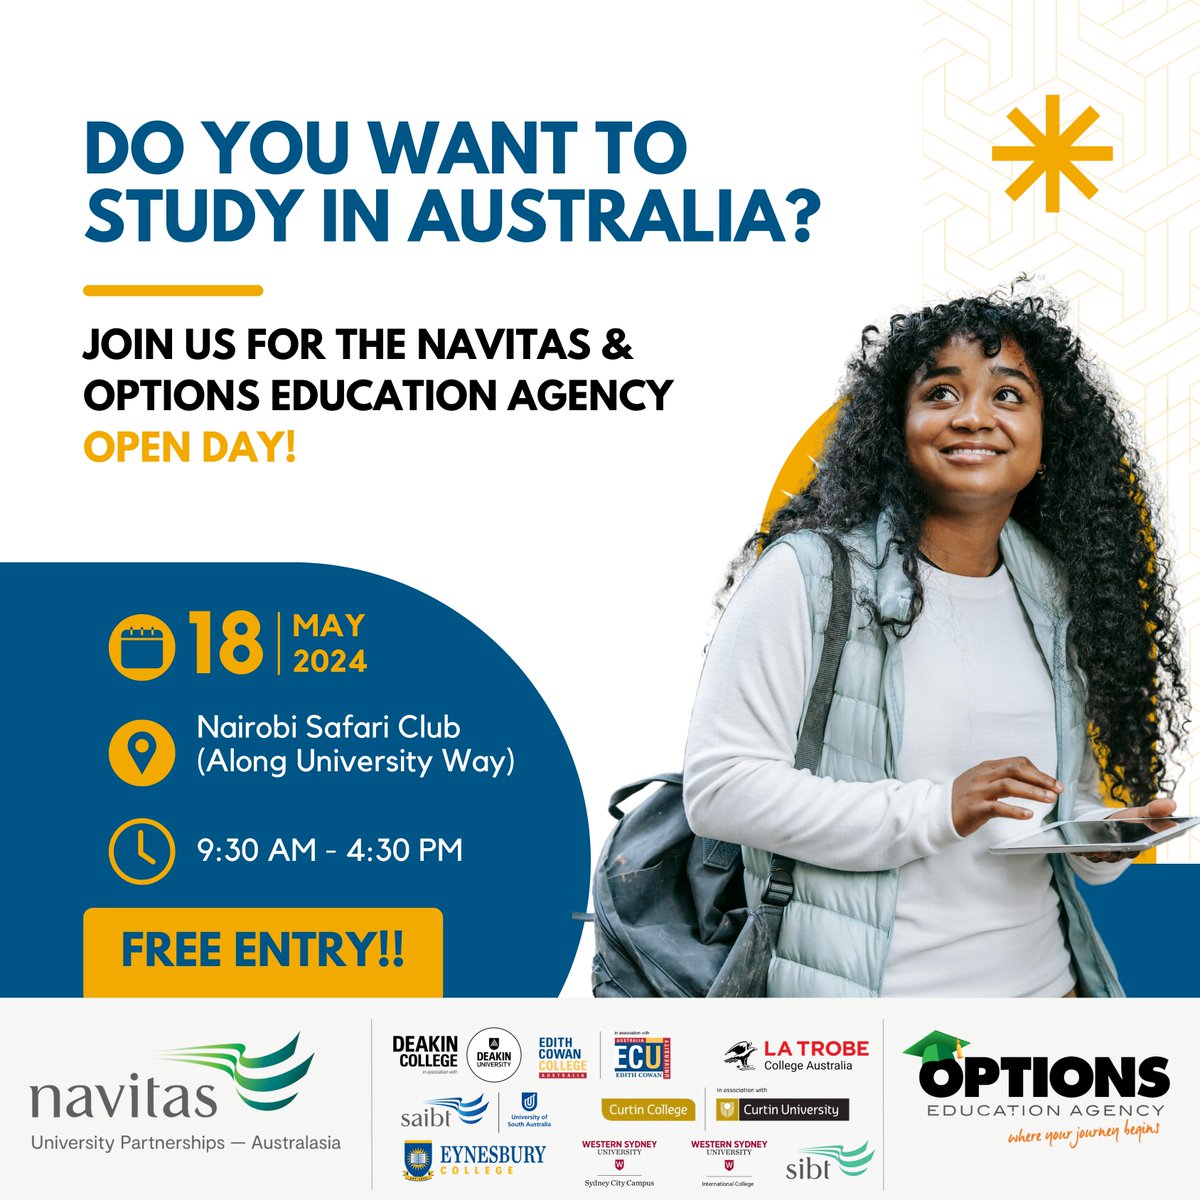 Dreaming of Studying in Australia? Join us at our Open Day on Saturday, May 18th, 2024, from 9:30 AM to 4:30 PM. The venue is the Nairobi Safari Club along University Way. ENTRY is FREE! For more info: 0724 333 222.
#studyinaustralia